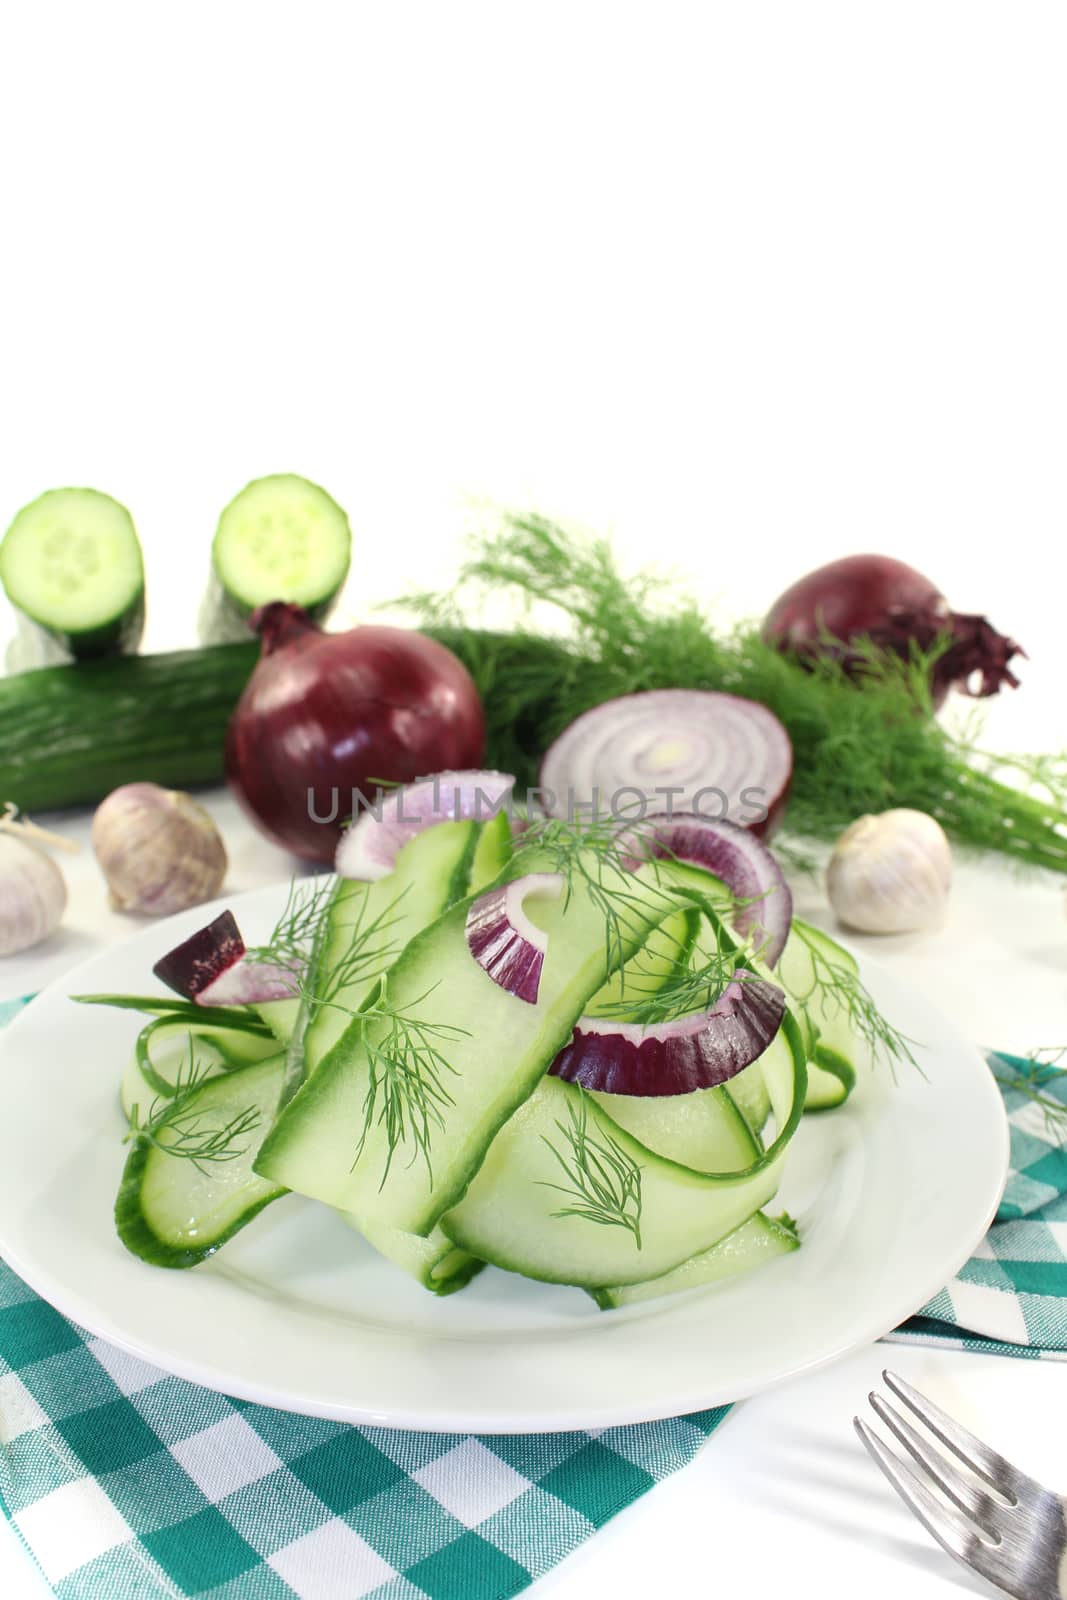 Cucumber salad with dill by discovery